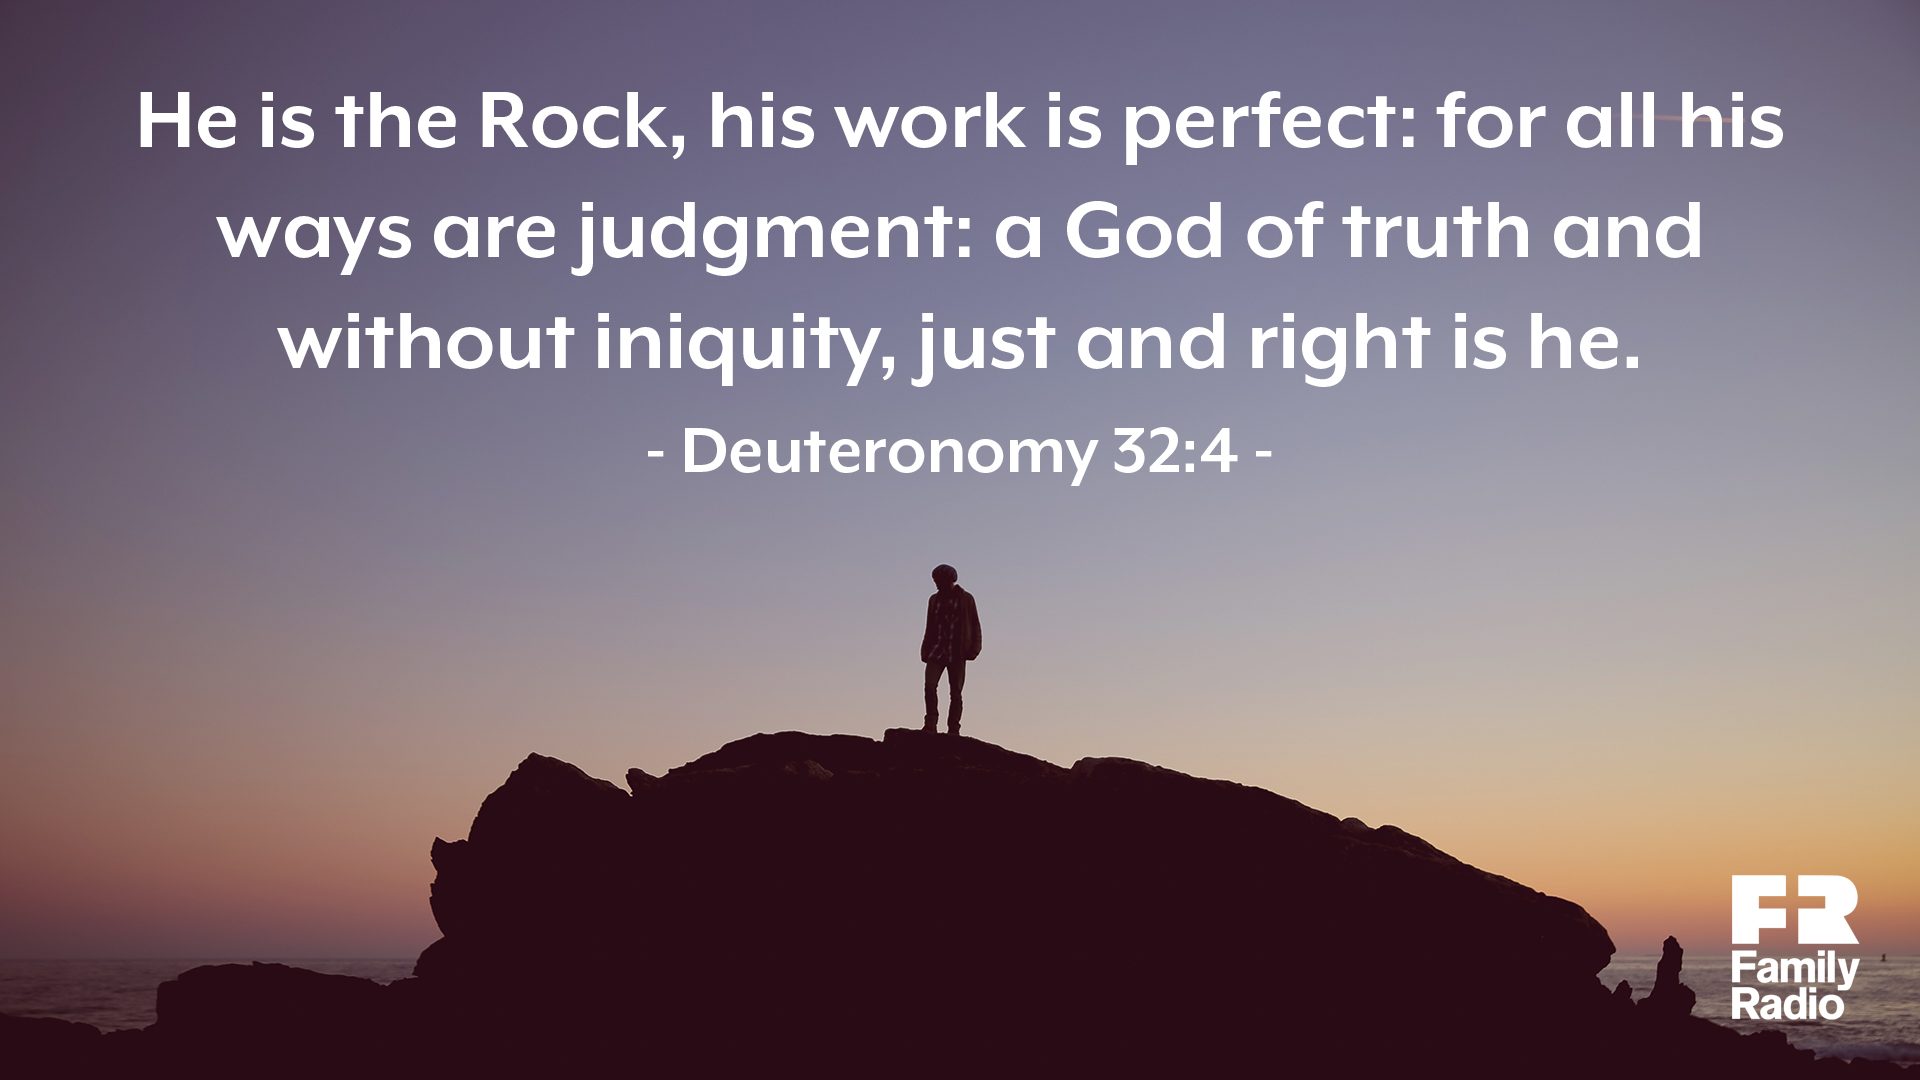 "He is the Rock, his work is perfect: for all his ways are judgment: a God of truth and with iniquity, just and right is he."